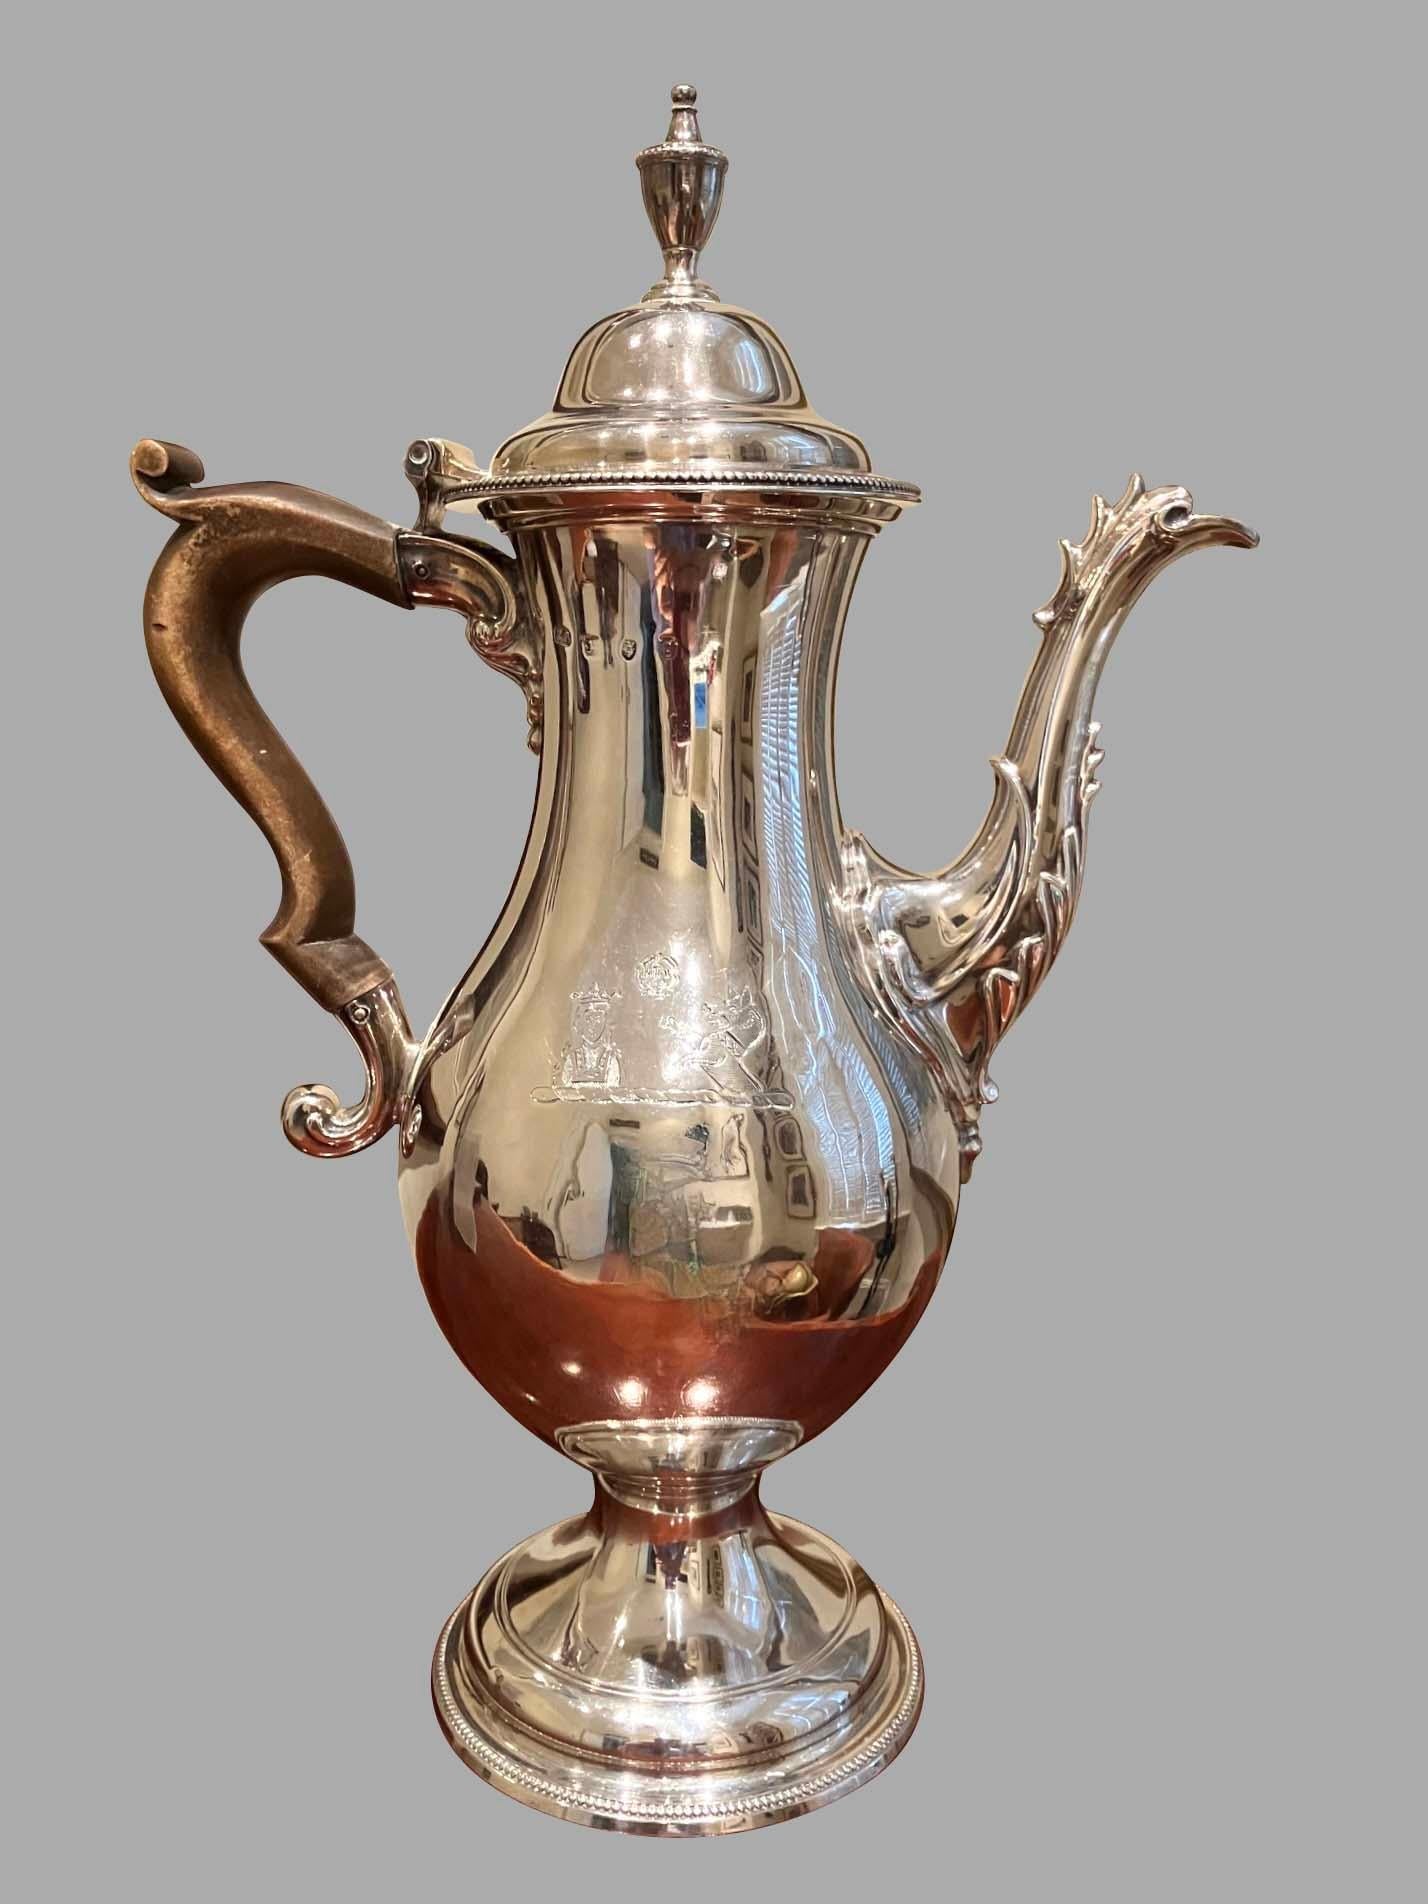 A fine English George III  sterling silver coffee pot of baluster form, made by the 